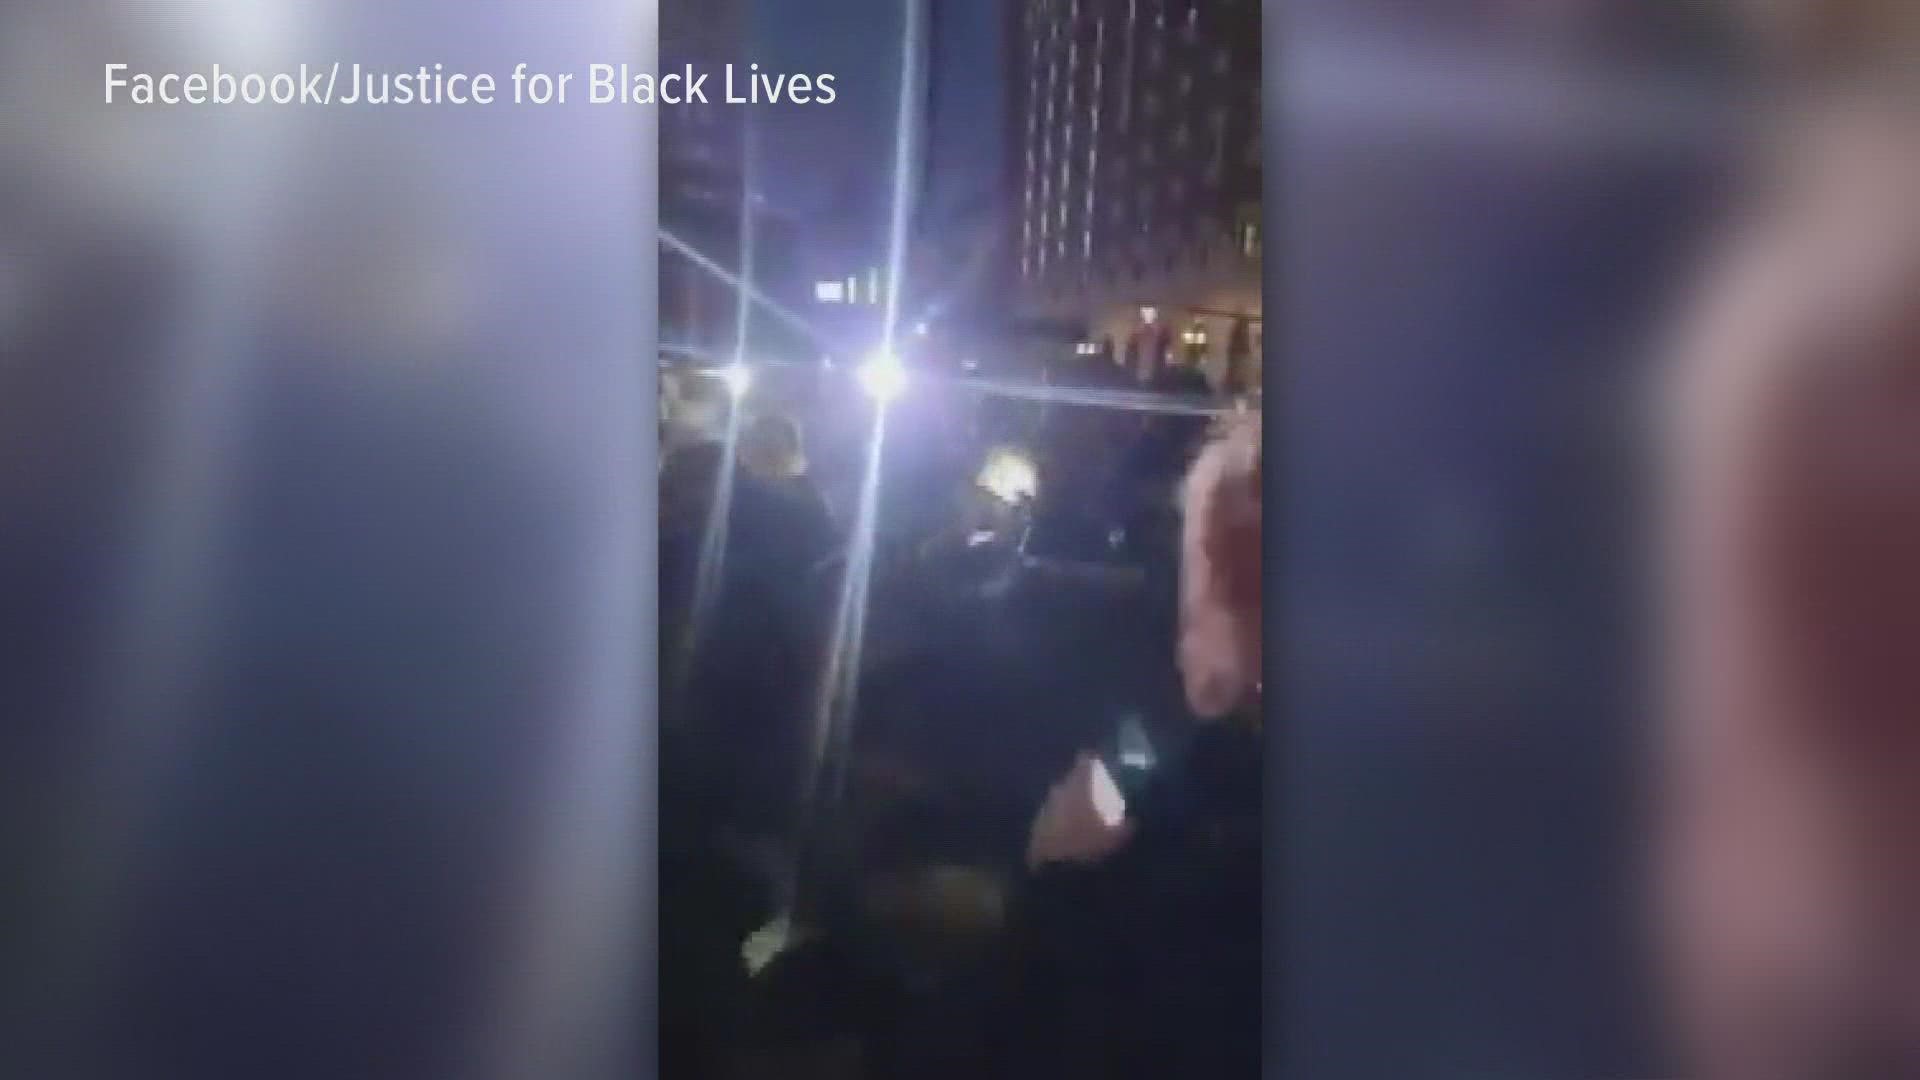 Justice for Black Lives claims they were protesting peacefully when officers became violent. However, police said they were violating city ordinances.